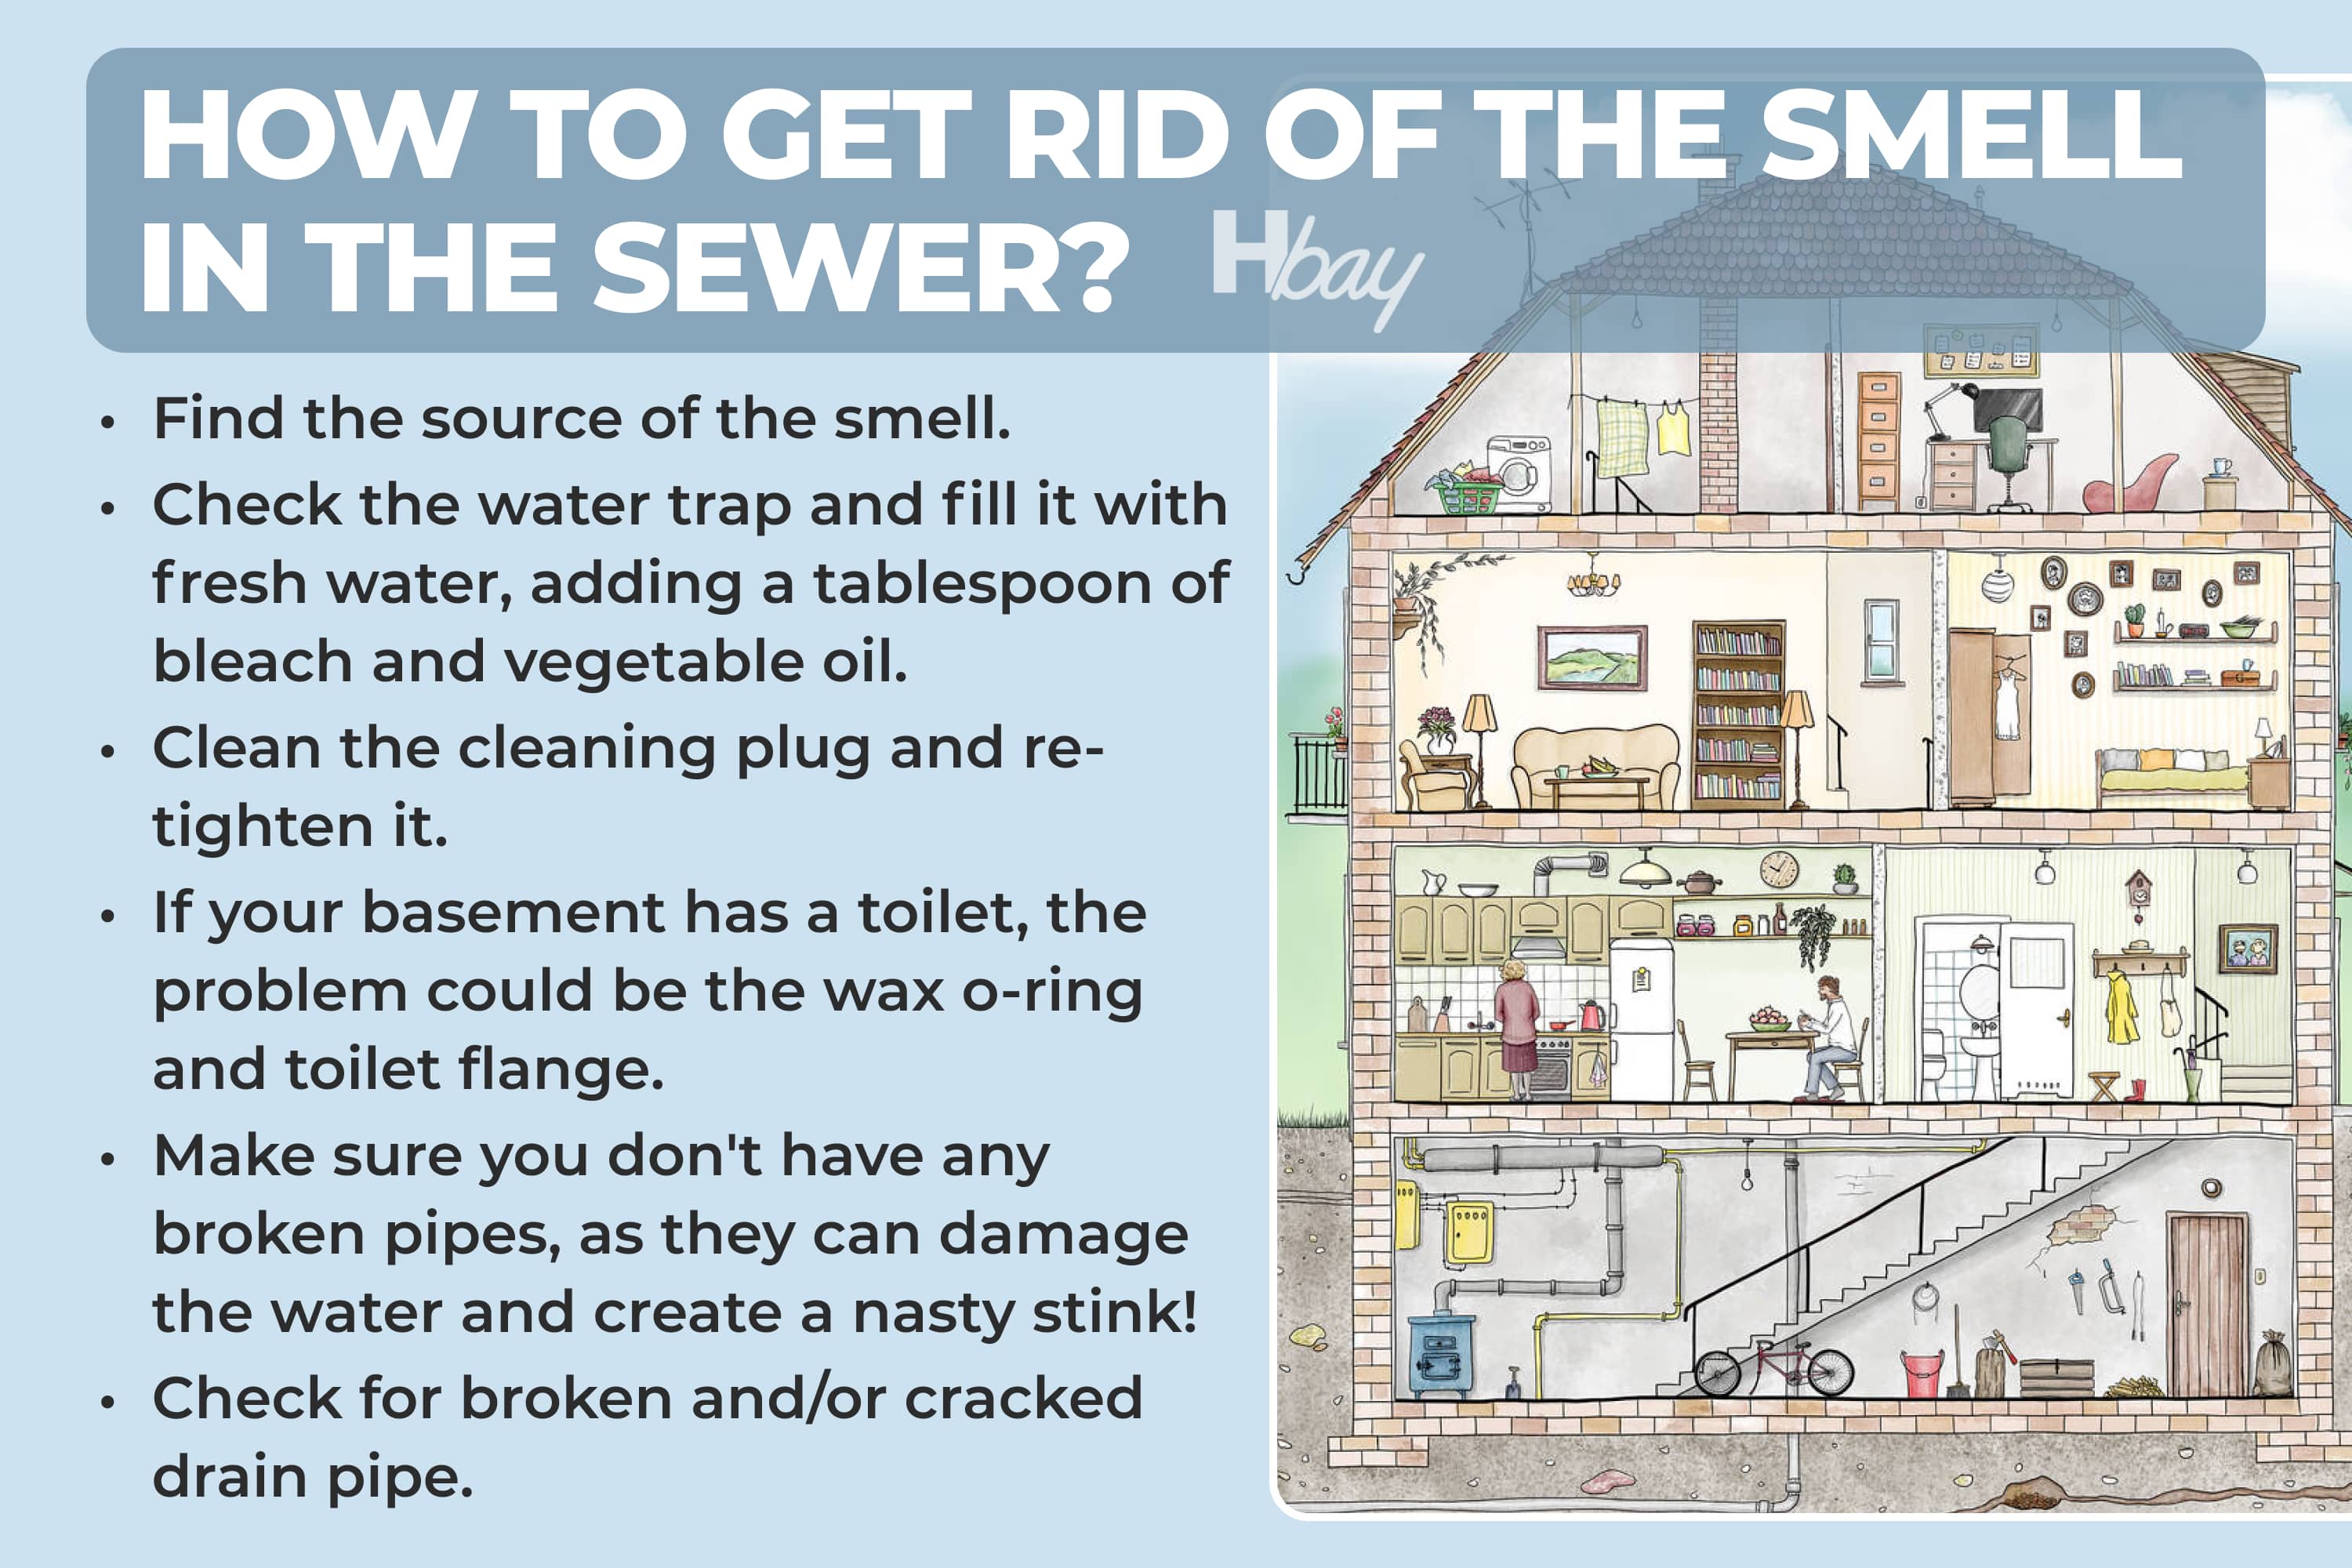 How to get rid of the smell in the sewer